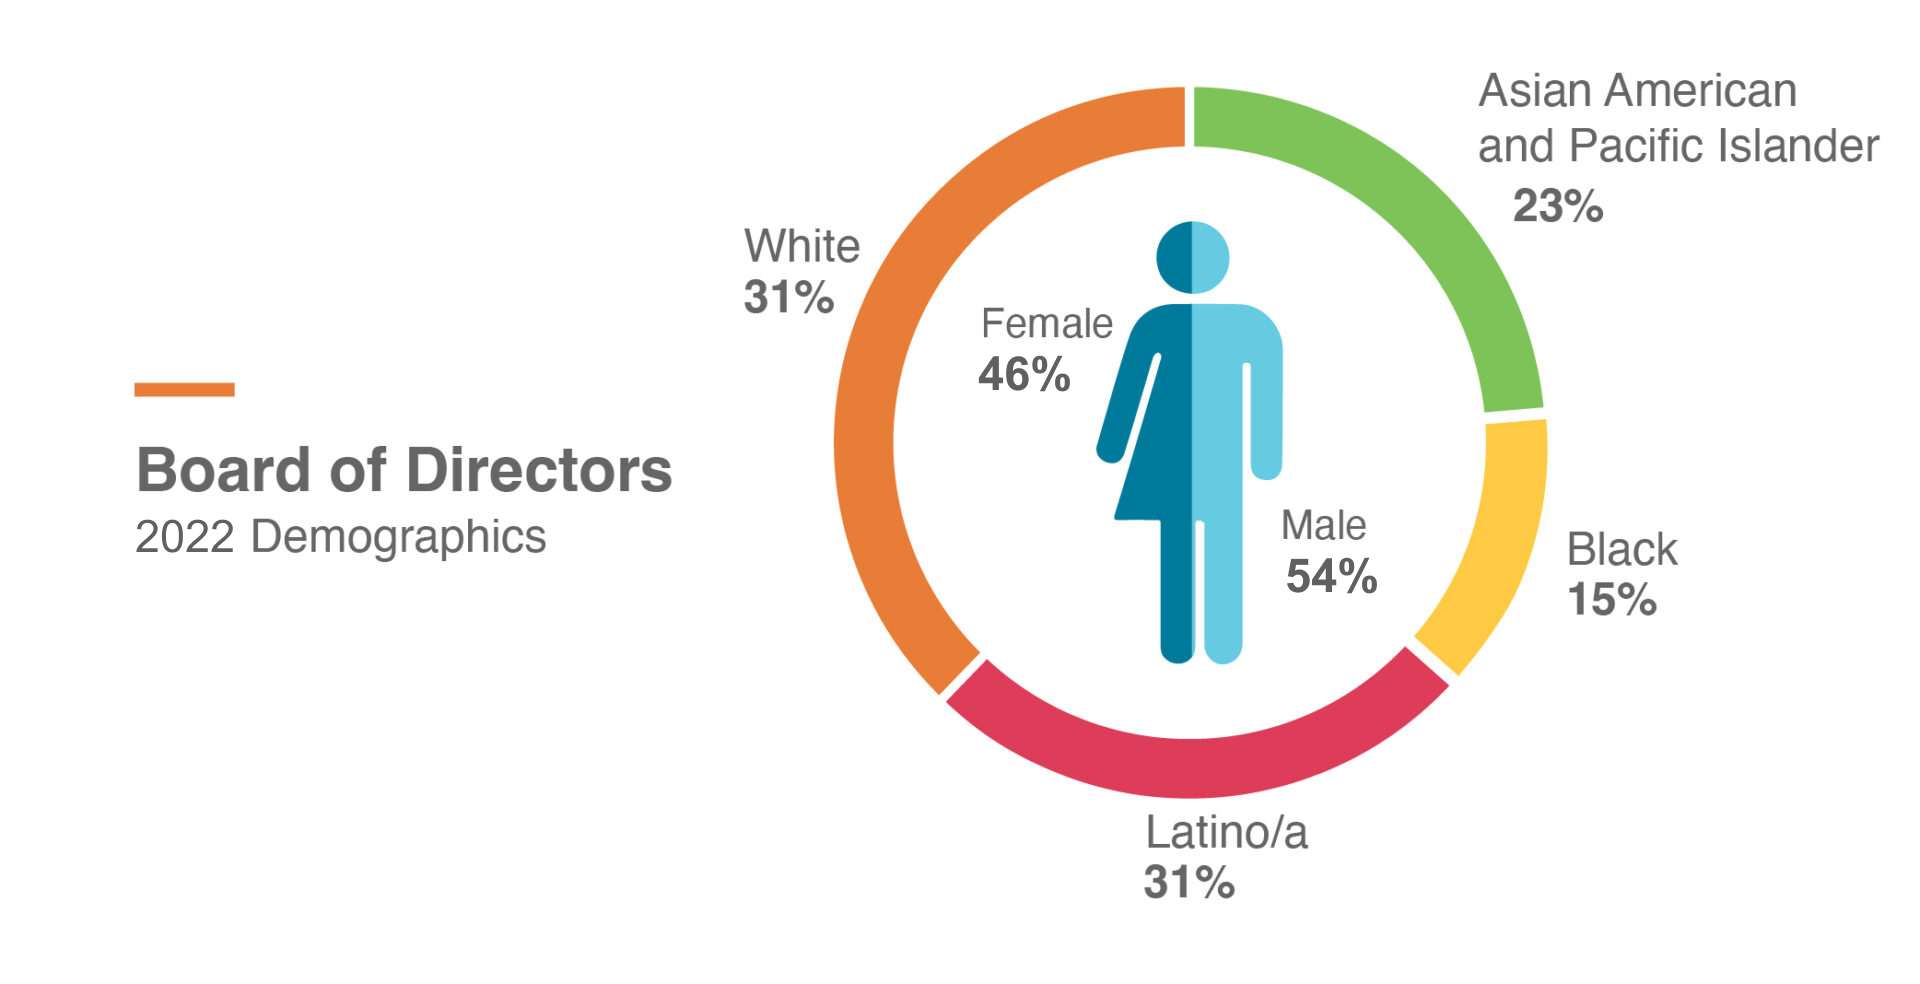 A graphic that shows our 2022 board demographics. 23% Asian American and Pacific Islander 15% Black 31% Latino/a 31% White 46% Female 54% Male